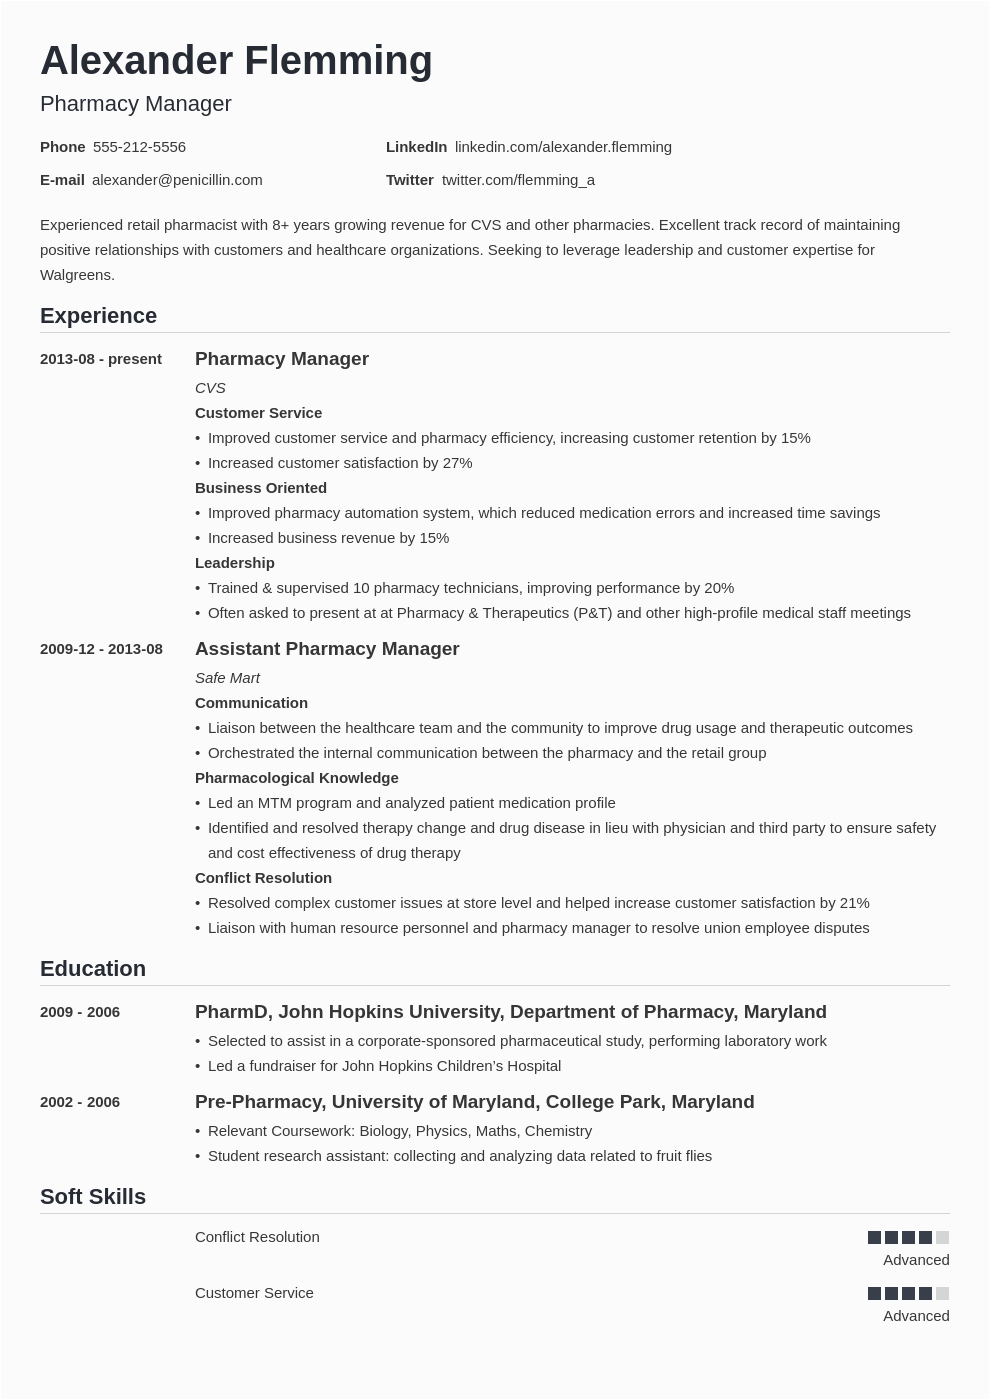 Sample Resume for Pharmacy assistant In Philippines Chemist Graduate assistant Cv Chemist Warehouse Pharmacy assistant